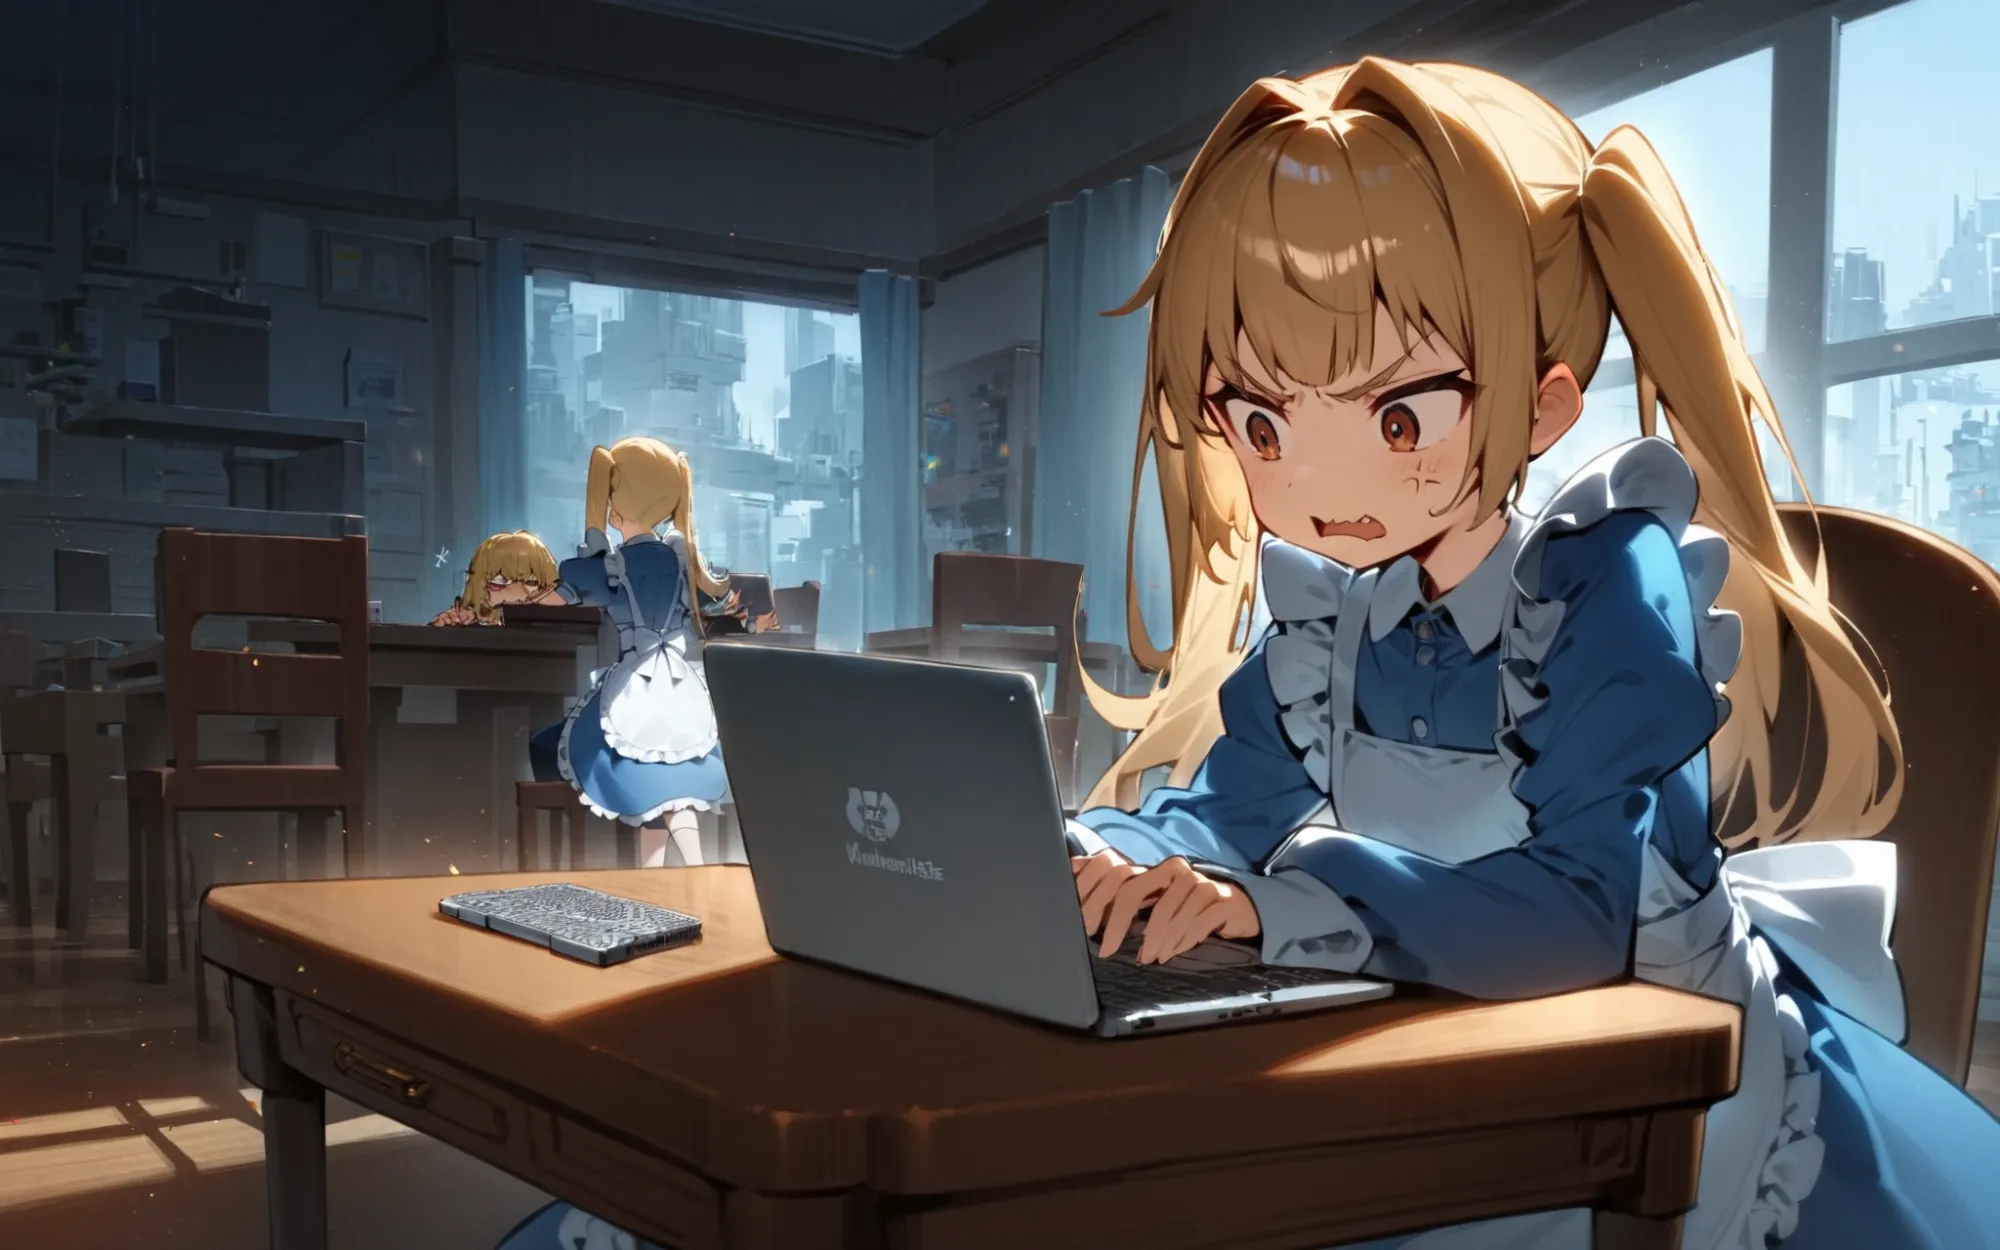 '1girl, hands on laptop, table, chair, sitting, (angry:0.8),\nblonde hair, twintails, blue dress, white apron, indoors,\nAlice in glitterworld\nNegative prompt: (worst quality, low quality:1.4), nsfw\nSteps: 30, Sampler: DPM++ 2M Karras, CFG scale: 7, Seed: 1, Size: 1024x640, Model hash: 642b08ca49, Model: ConfusionXL2.0_fp16_vae, Denoising strength: 0.6, Clip skip: 2, Hires upscale: 2, Hires steps: 15, Hires upscaler: ESRGAN_4x, Version: v1.7.0'